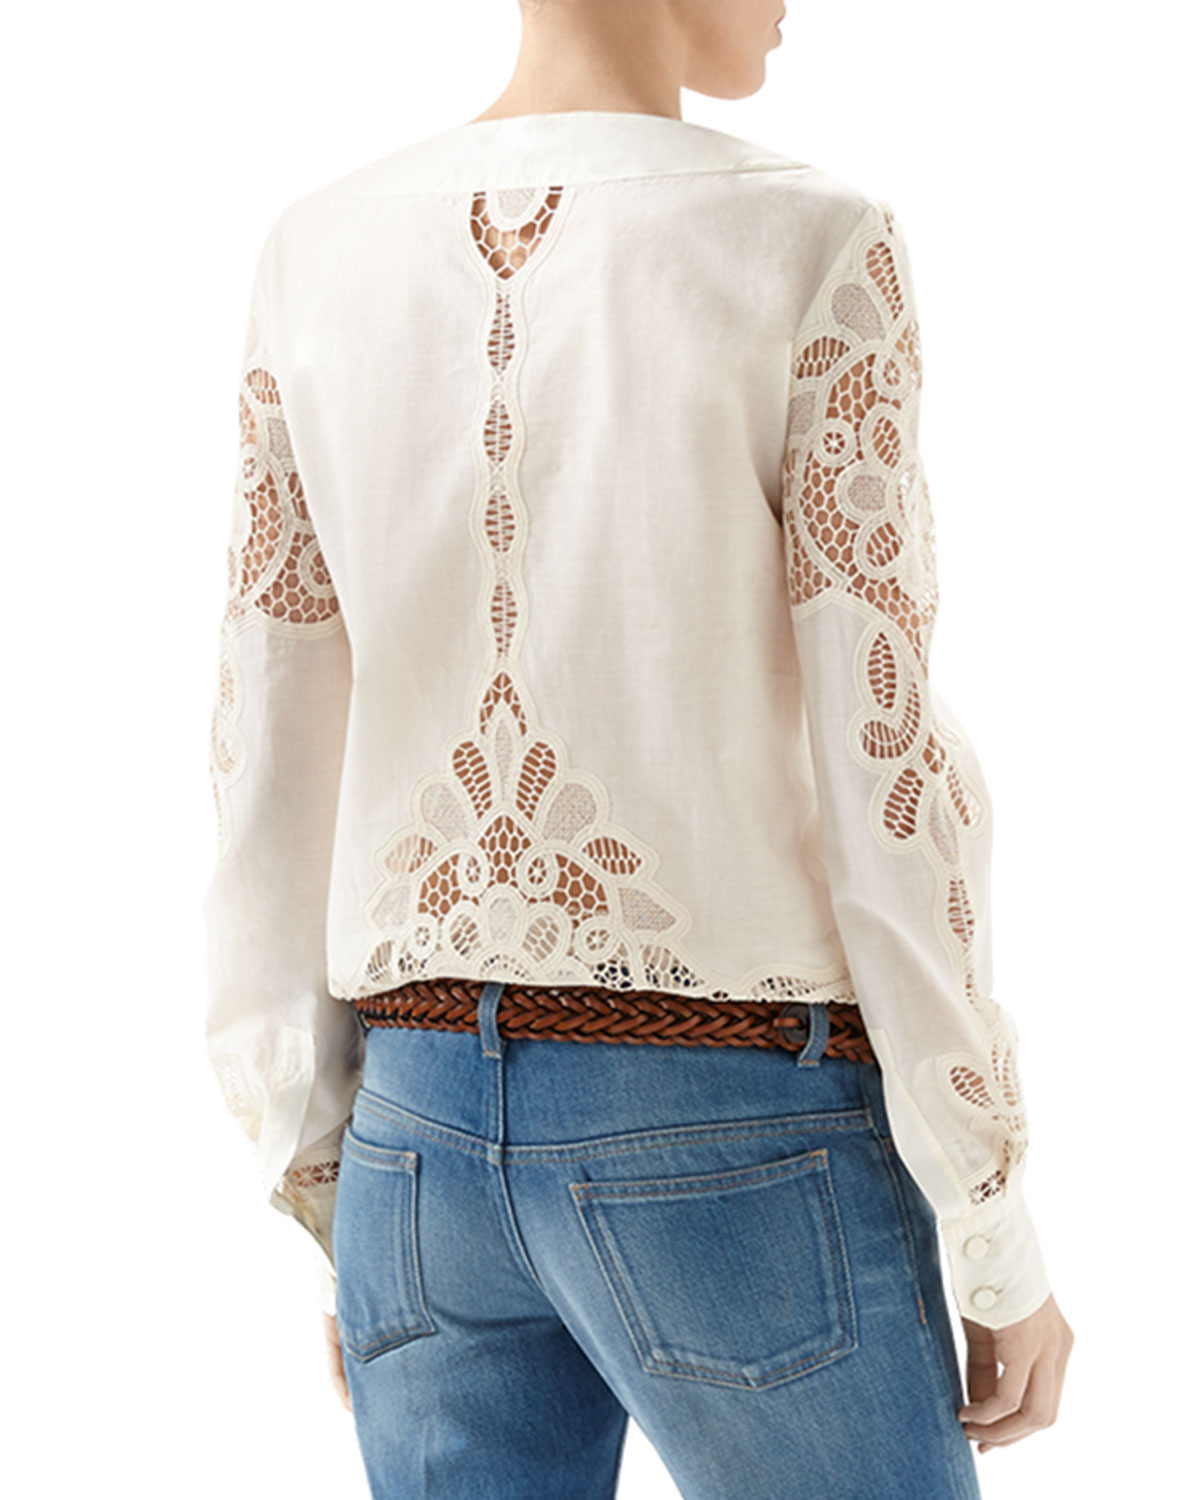 Gucci Broderie Anglaise Cotton Muslin Lace-Up Shirt in White | Lyst